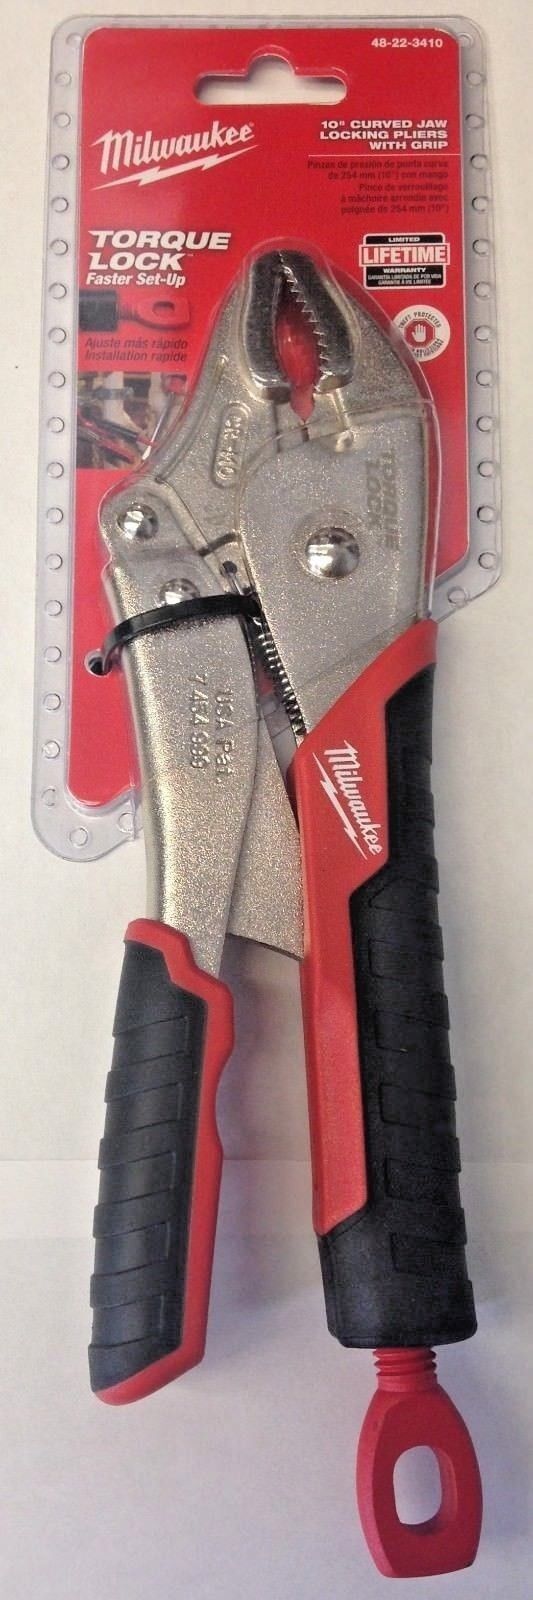 Milwaukee 48-22-3410 10" Torque Lock Curved Jaw Locking Pliers with Durable Grip